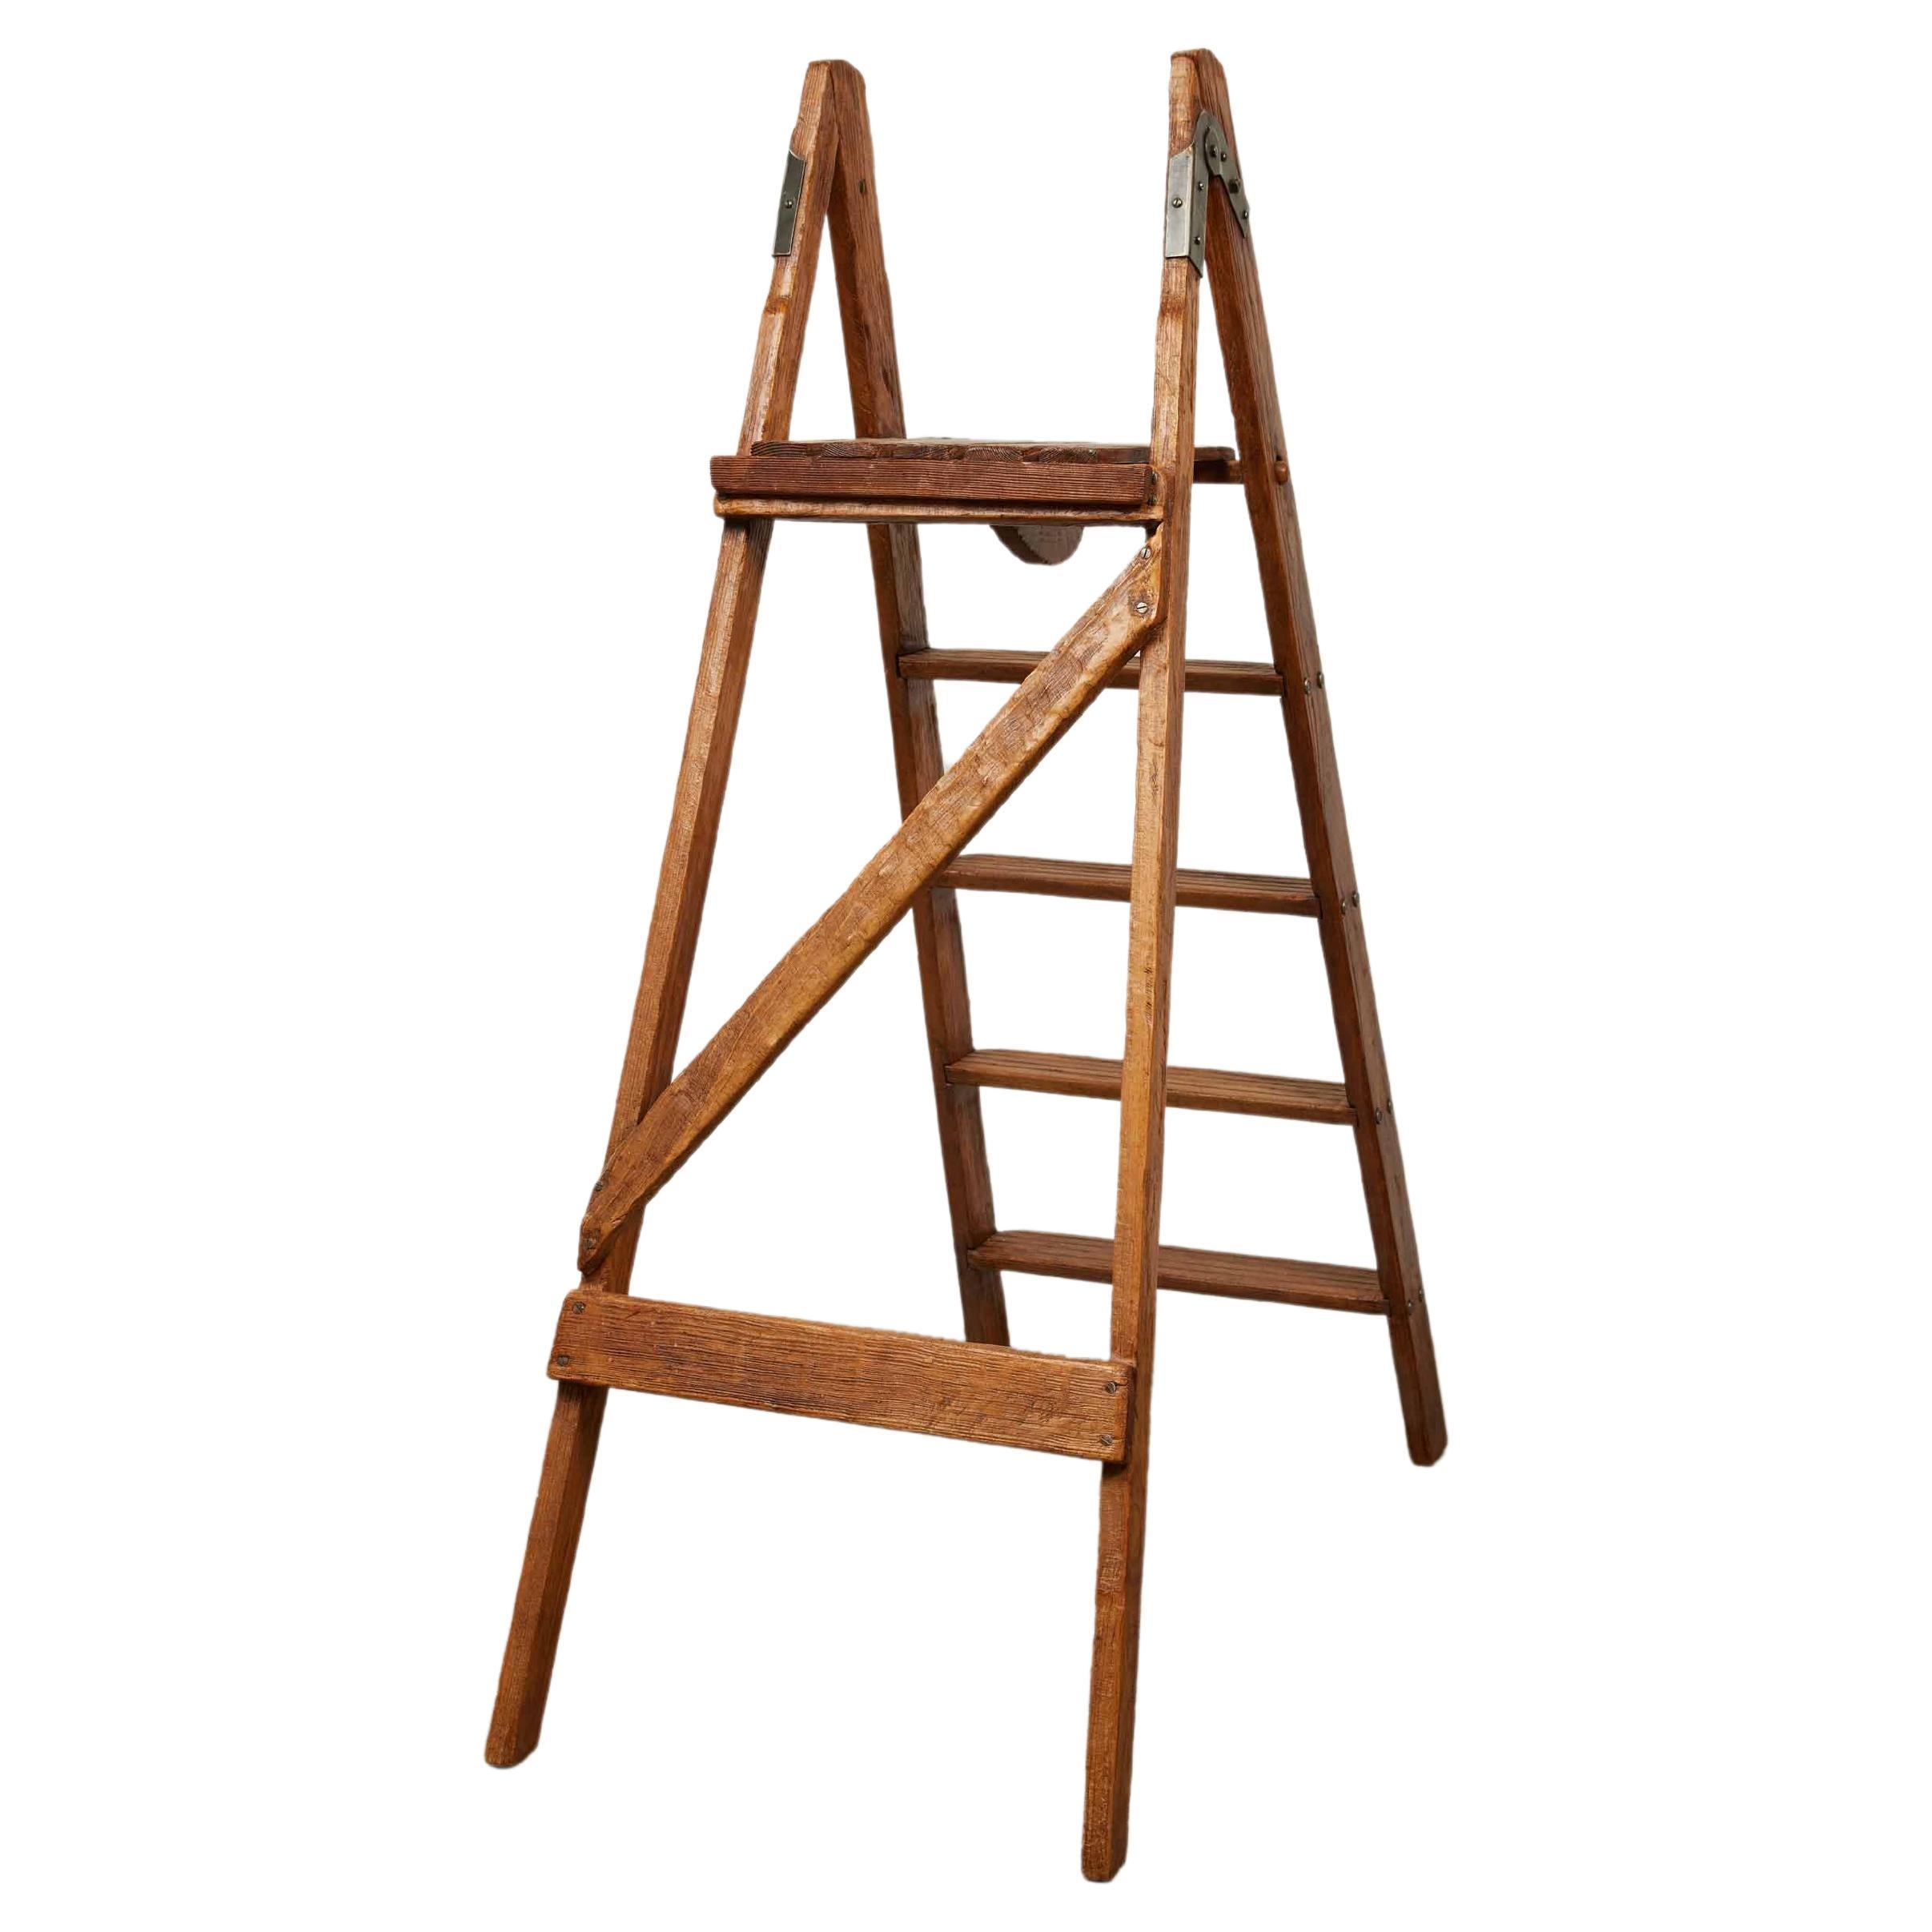 Antique English Folding Library Step Ladder, 1800s adorned with aged iron hardware.

This exquisite antique English library ladder, dating back to the 1800s, is a testament to the unmatched craftsmanship of the period. This folding ladder stands as